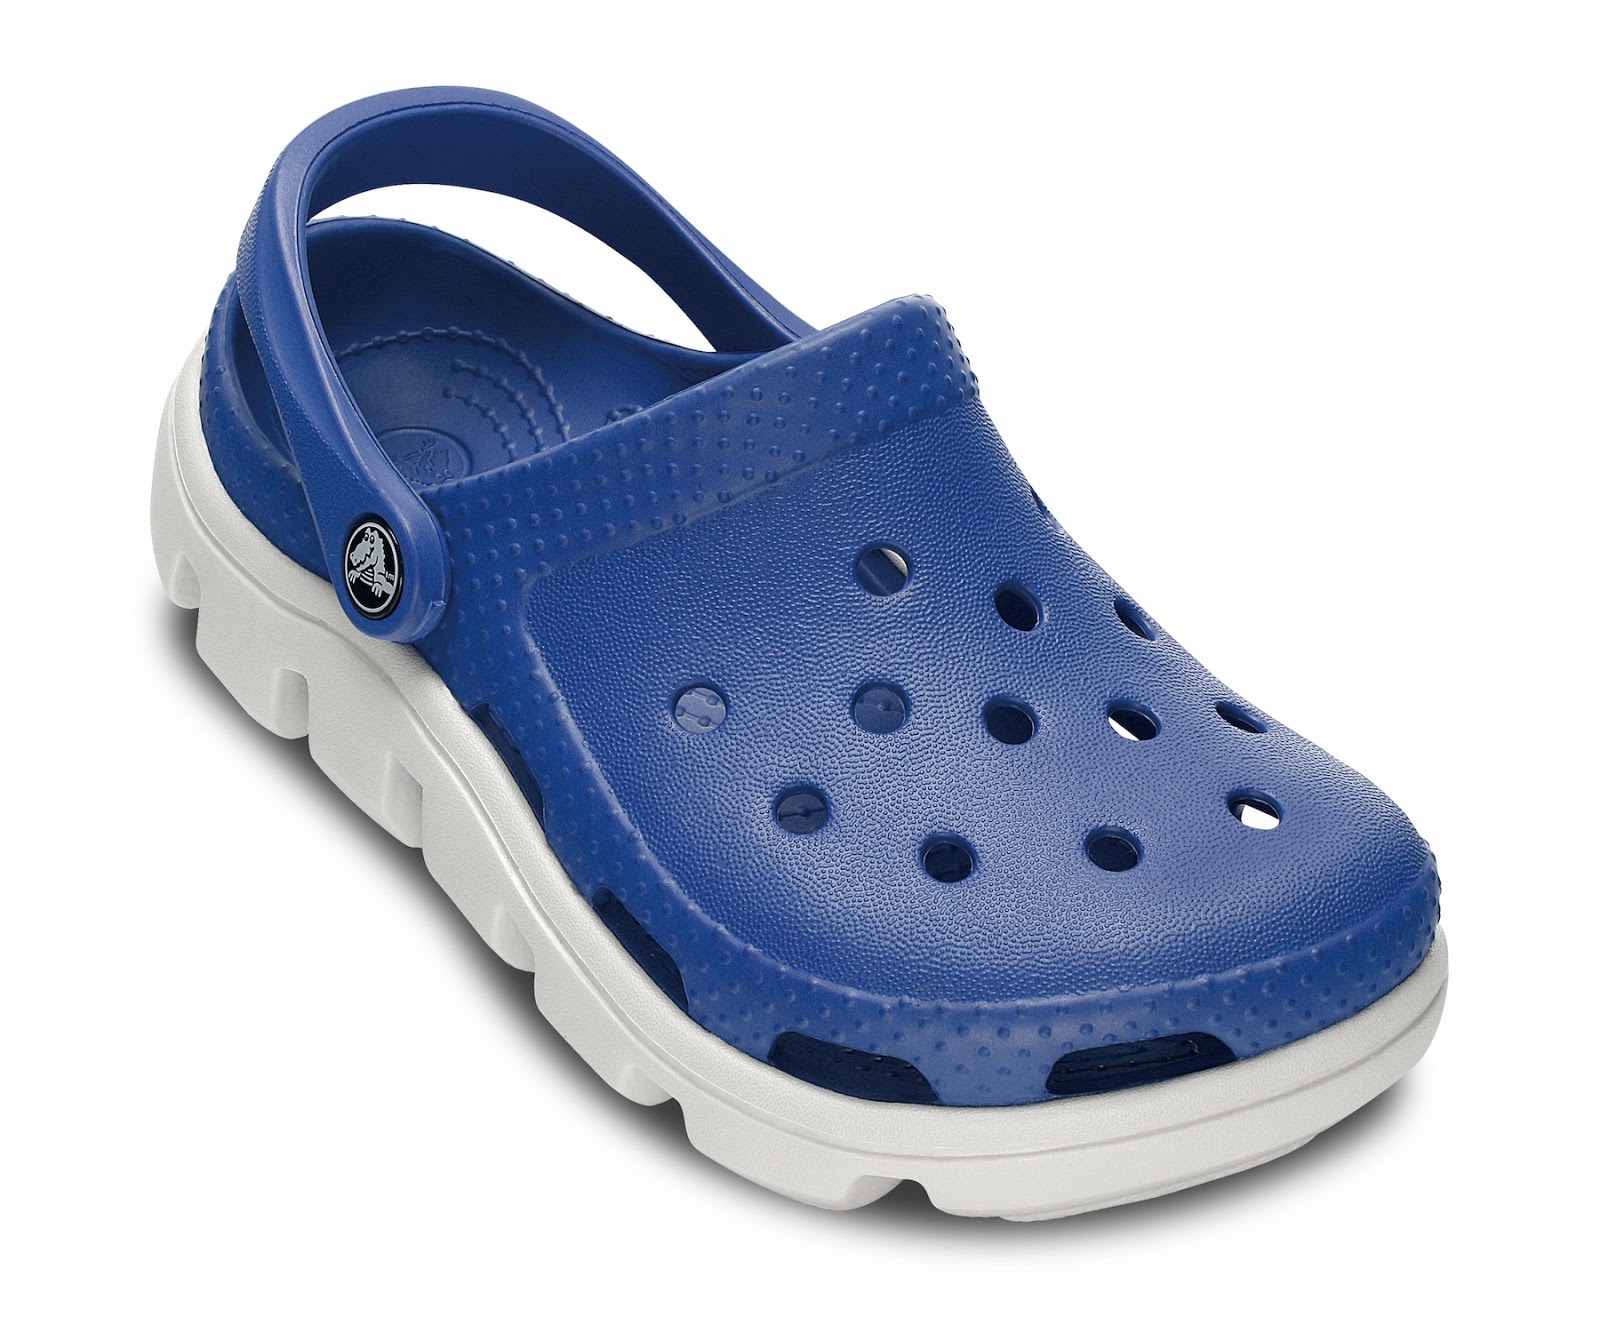  Crocs Duet Sport  This comfy clog is a real toughie The 